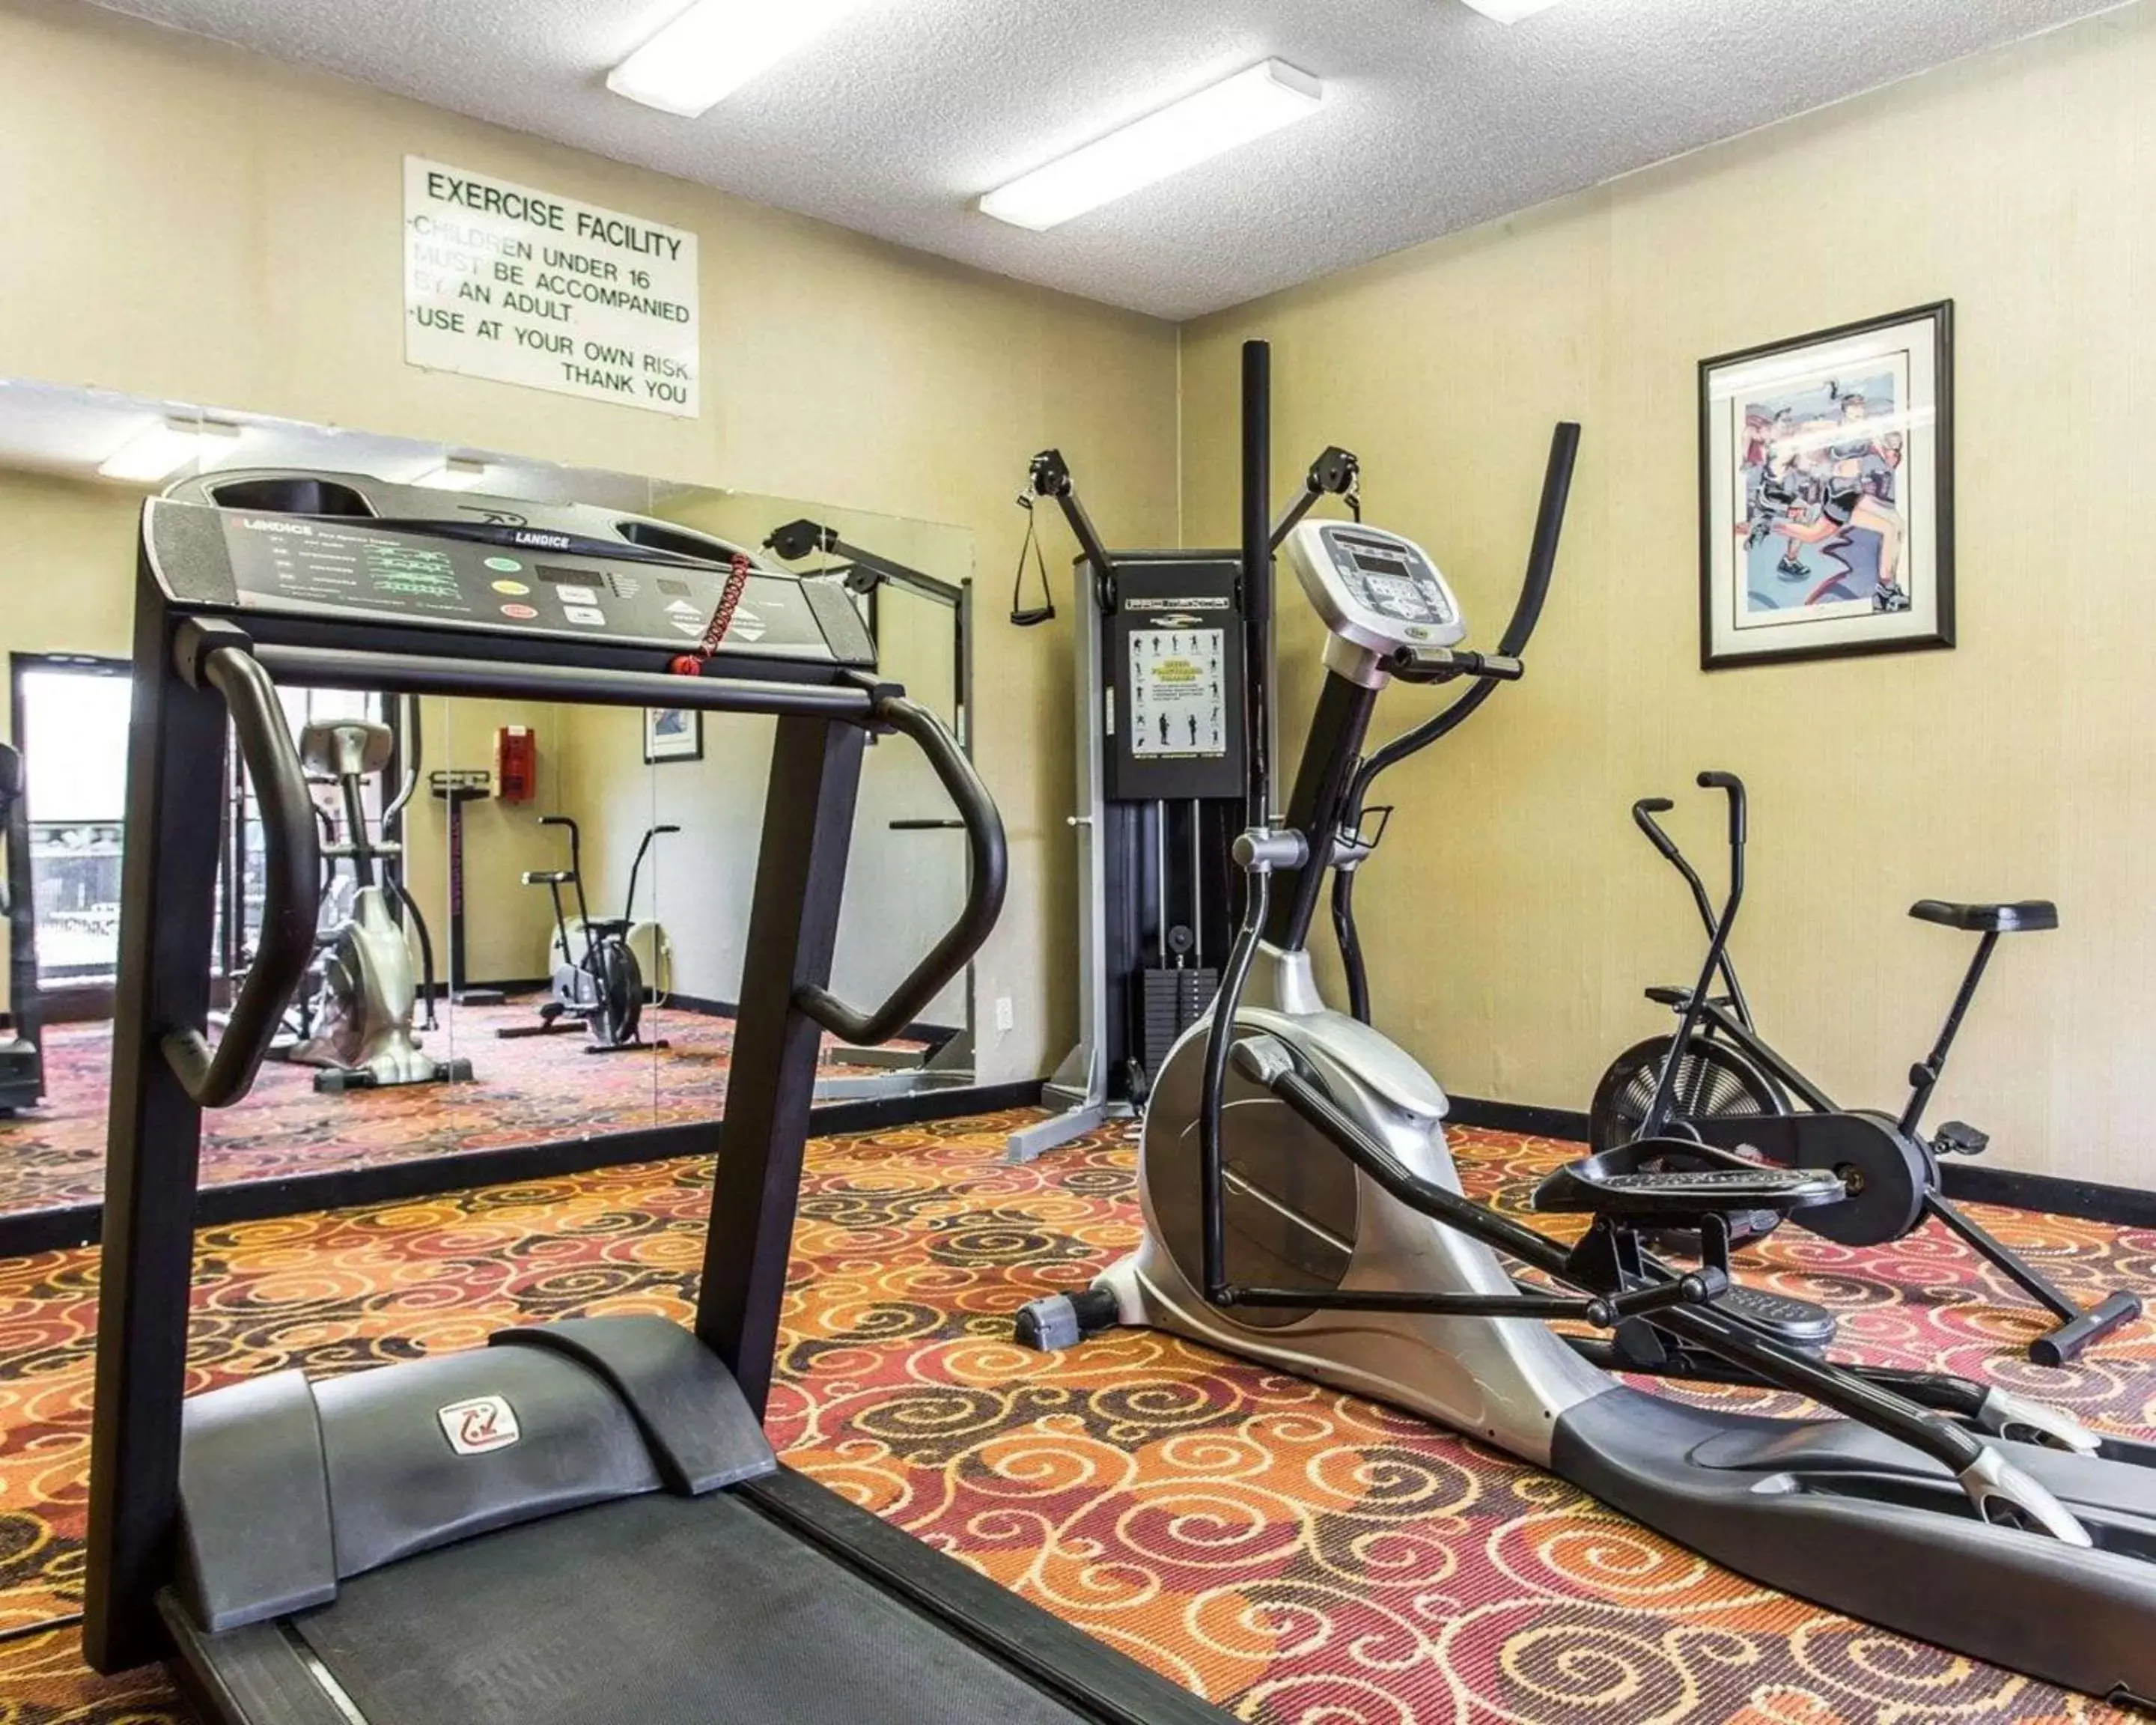 Fitness centre/facilities, Fitness Center/Facilities in Quality Suites Convention Center - Hickory